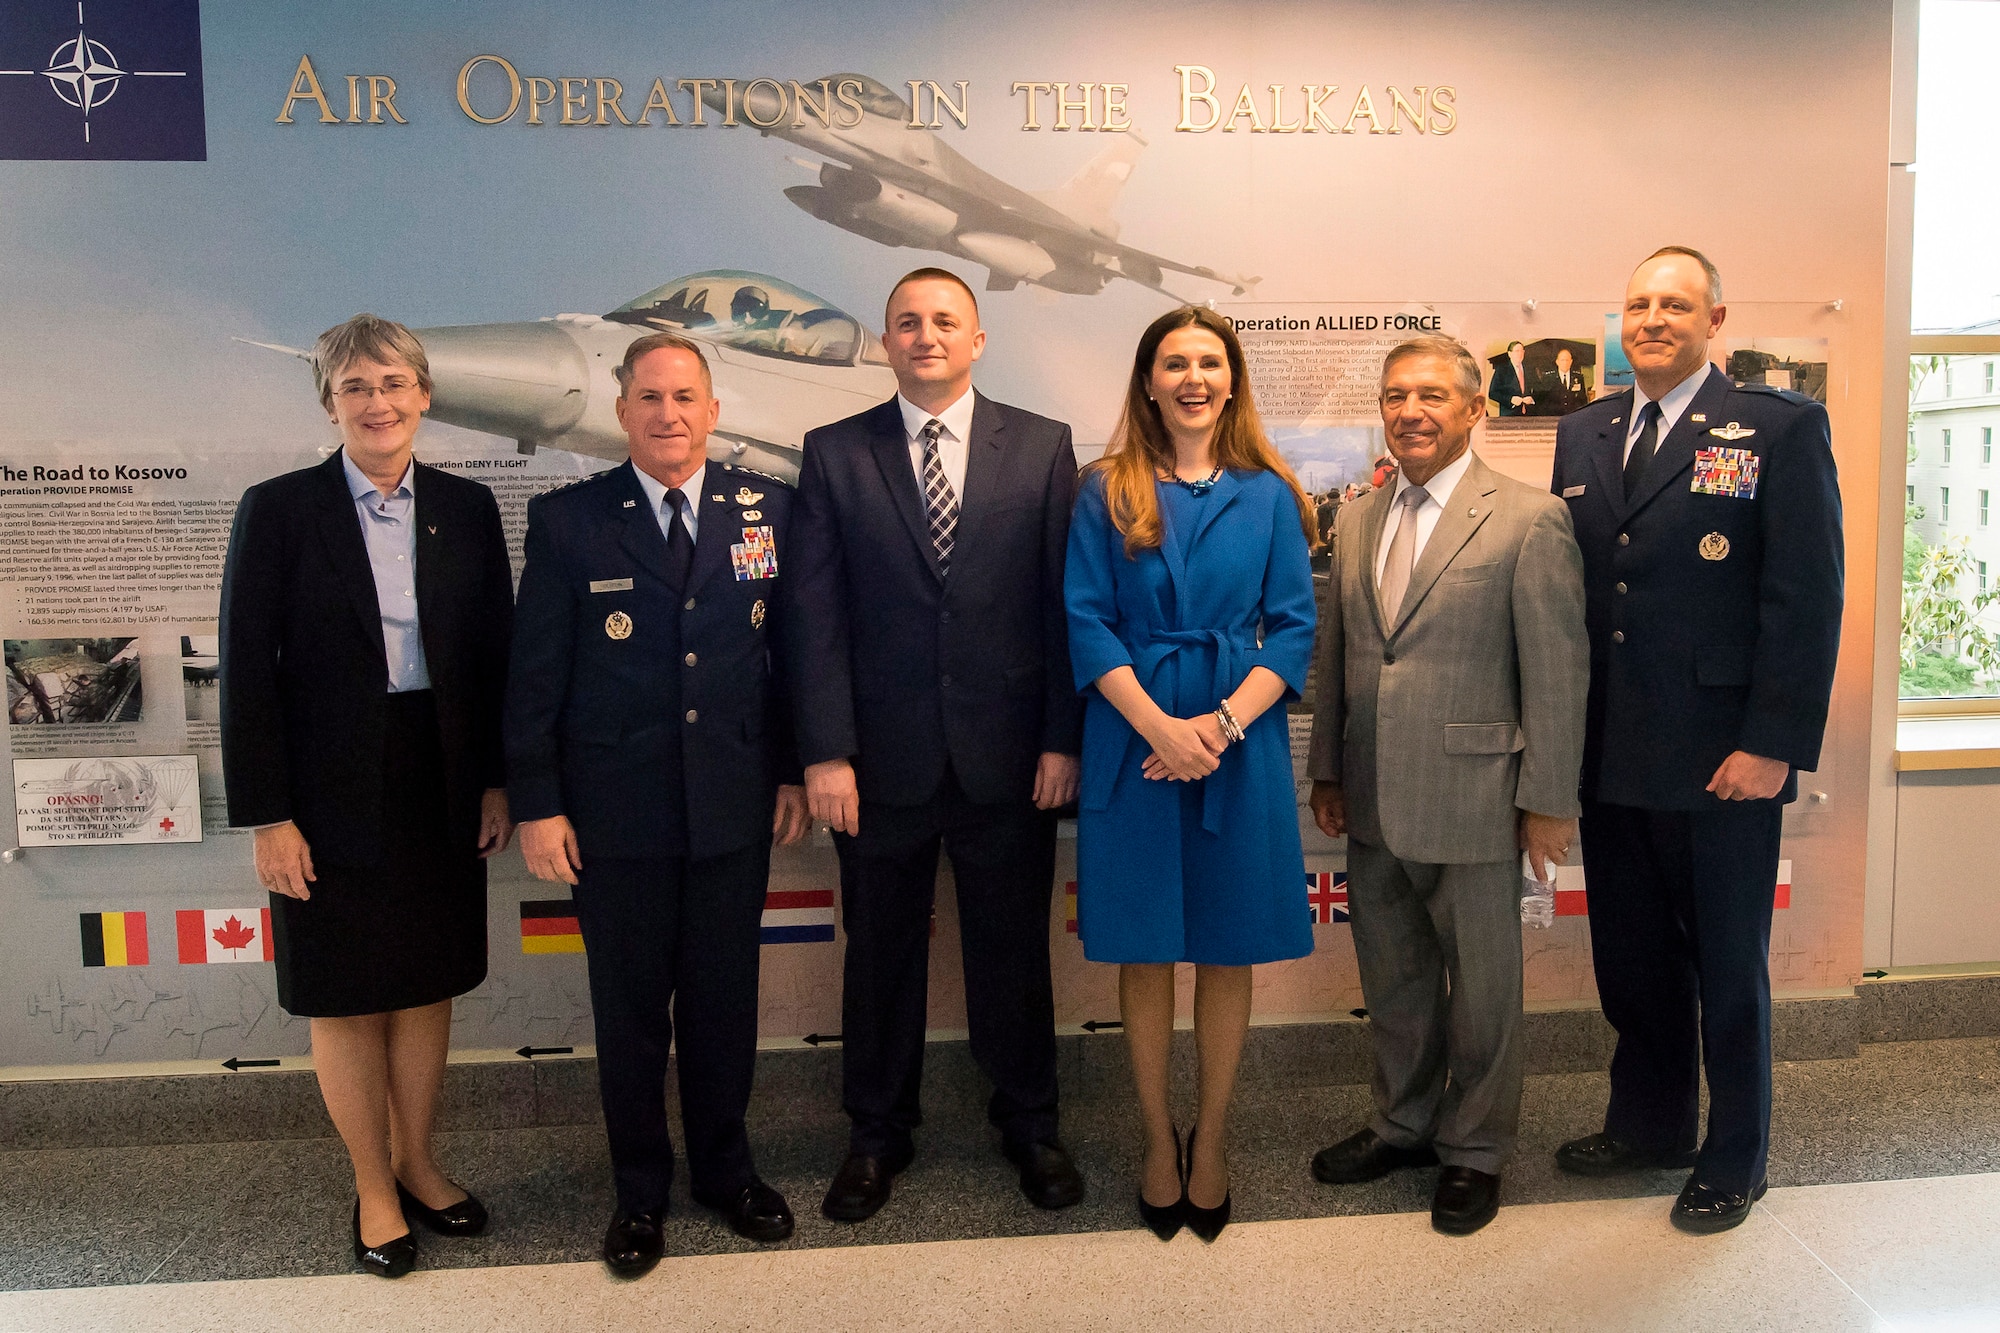 Secretary of the Air Force Heather Wilson, Air Force Chief of Staff Gen. David L. Goldfein, Muharren Alija, Ambassador of the Republic of Kosovo Vlora Çitaku, retired Lt. Gen. Dan Leaf, former 31st Fighter Wing and 31st Expeditionary Wing commander, Aviano Air Base, Italy and Brig. Gen. Chris Short, Aircrew Crisis Task Force director, pose for a photo in front of a new display commemorating the 20th anniversary of Operation Allied Force during a ceremony at the Pentagon, Arlington, Va., May 8, 2019. Operation Allied Force was initiated in 1999 by NATO in response to Serbian President Slobodan Milosevic’s campaign of ethnic cleansing of Kosovar Albanians. (U.S. Air Force photo by Adrian Cadiz)